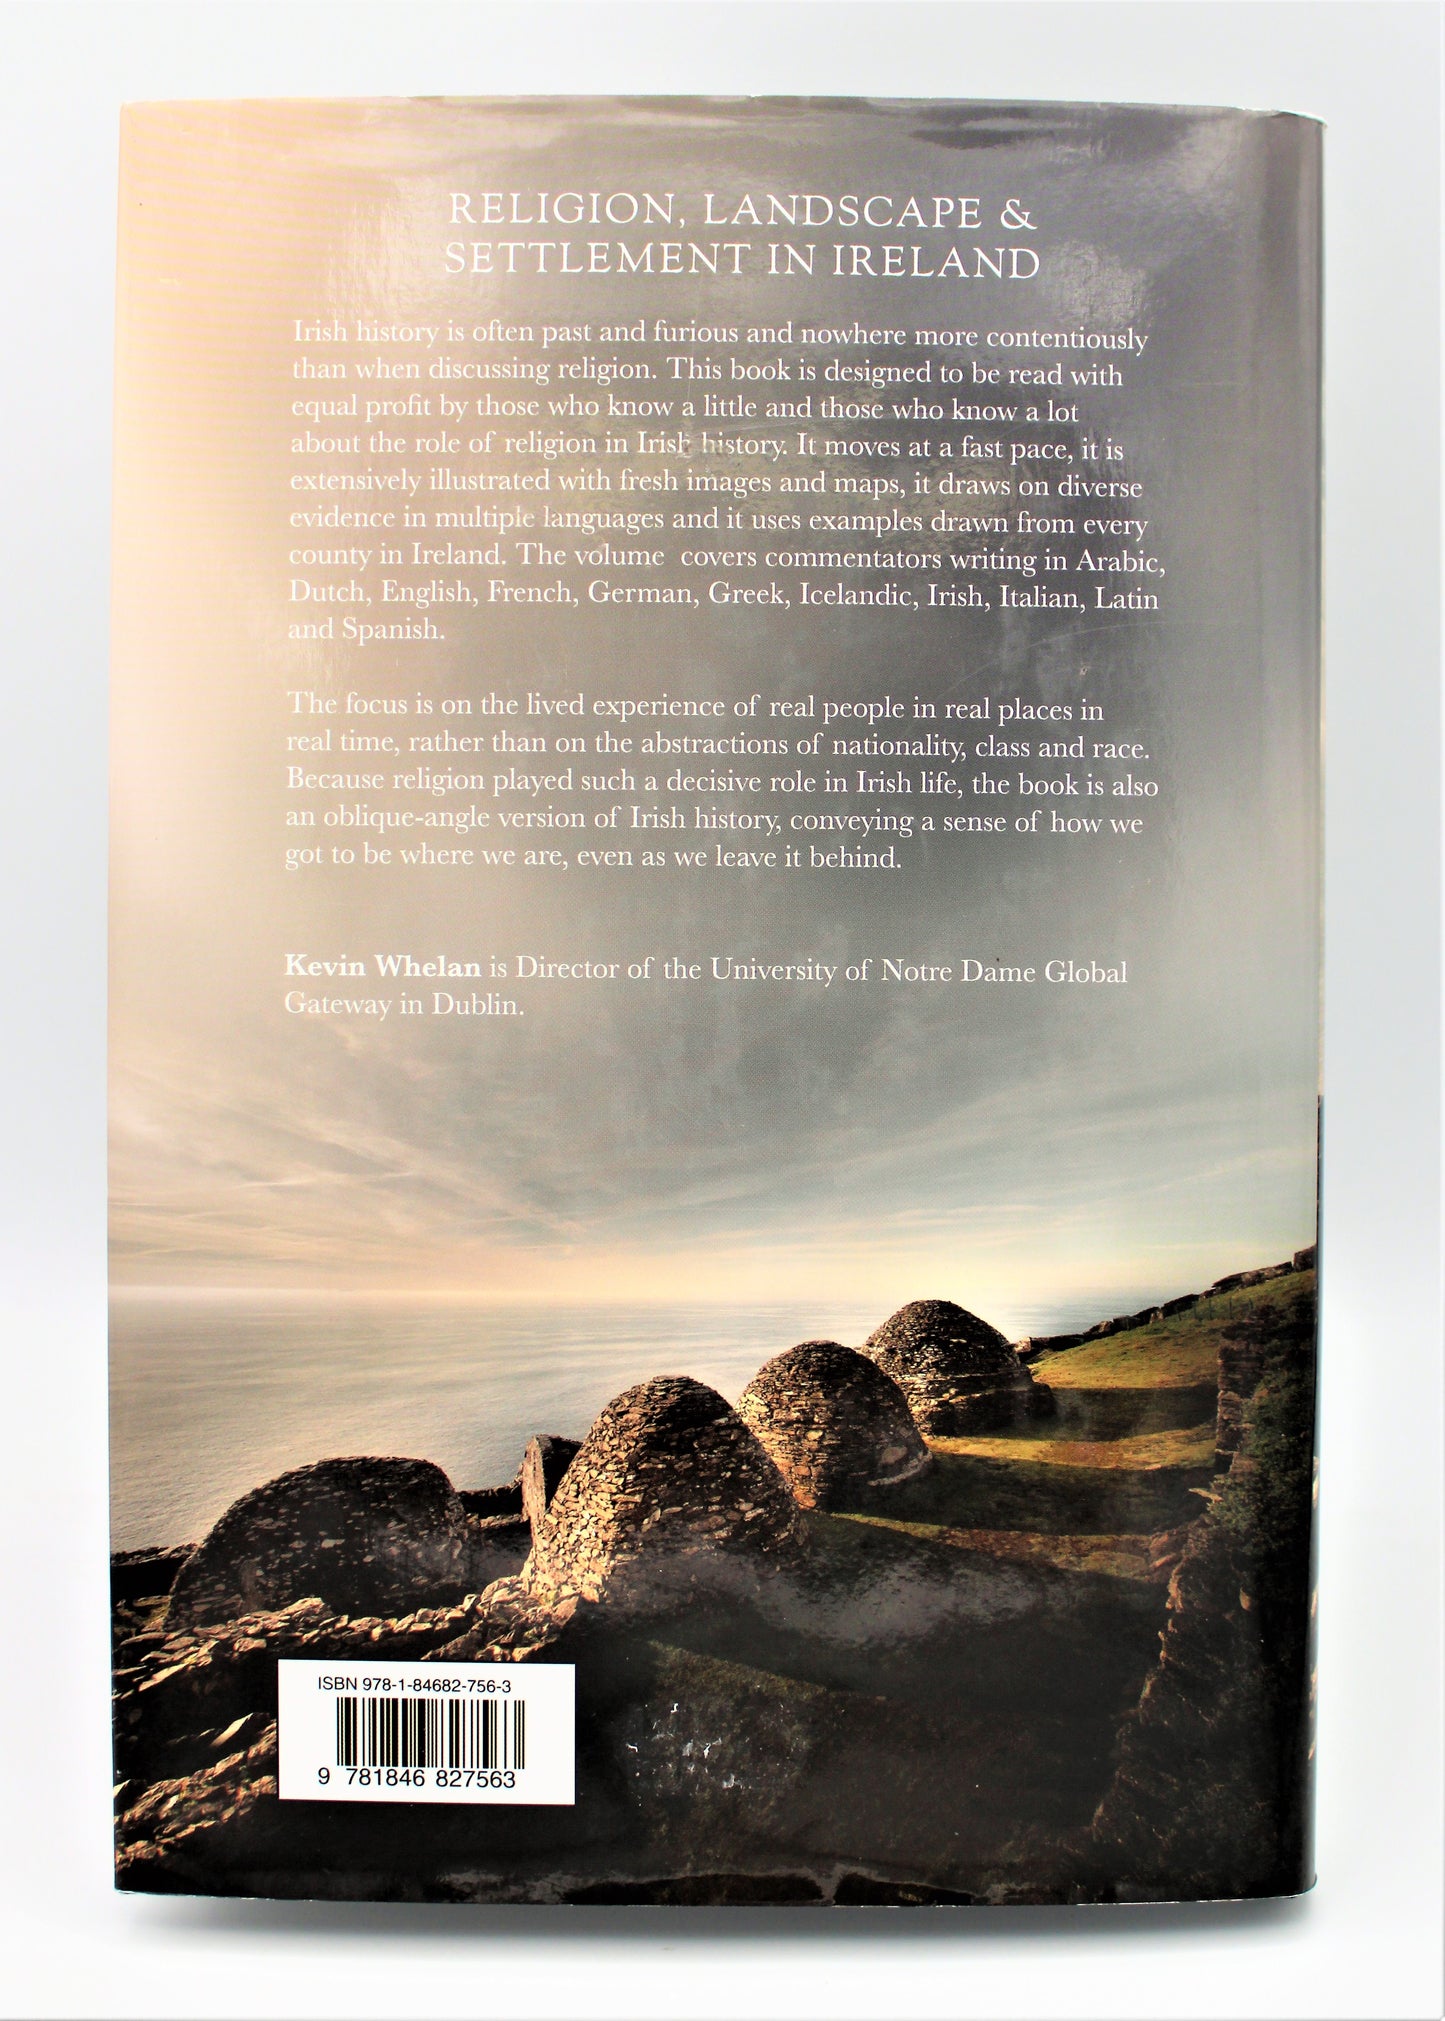 Back Cover of Religion, Landscape and Settlement in Ireland: From Patrick to Present Hardback Book